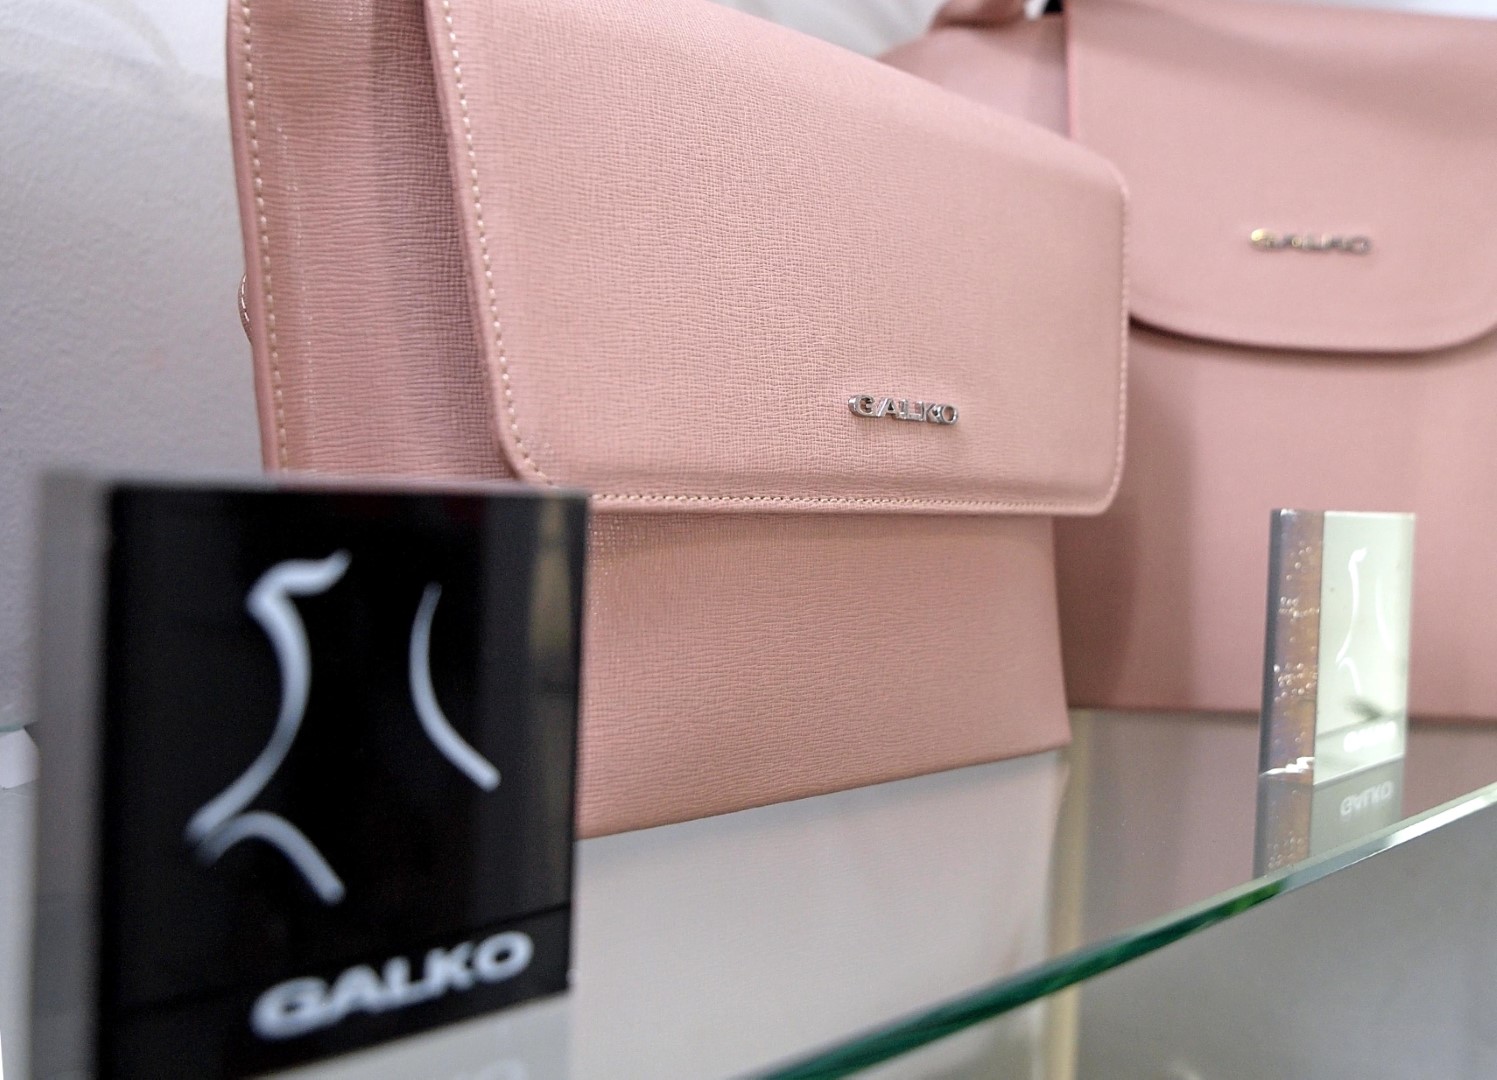 galko pink bags in store